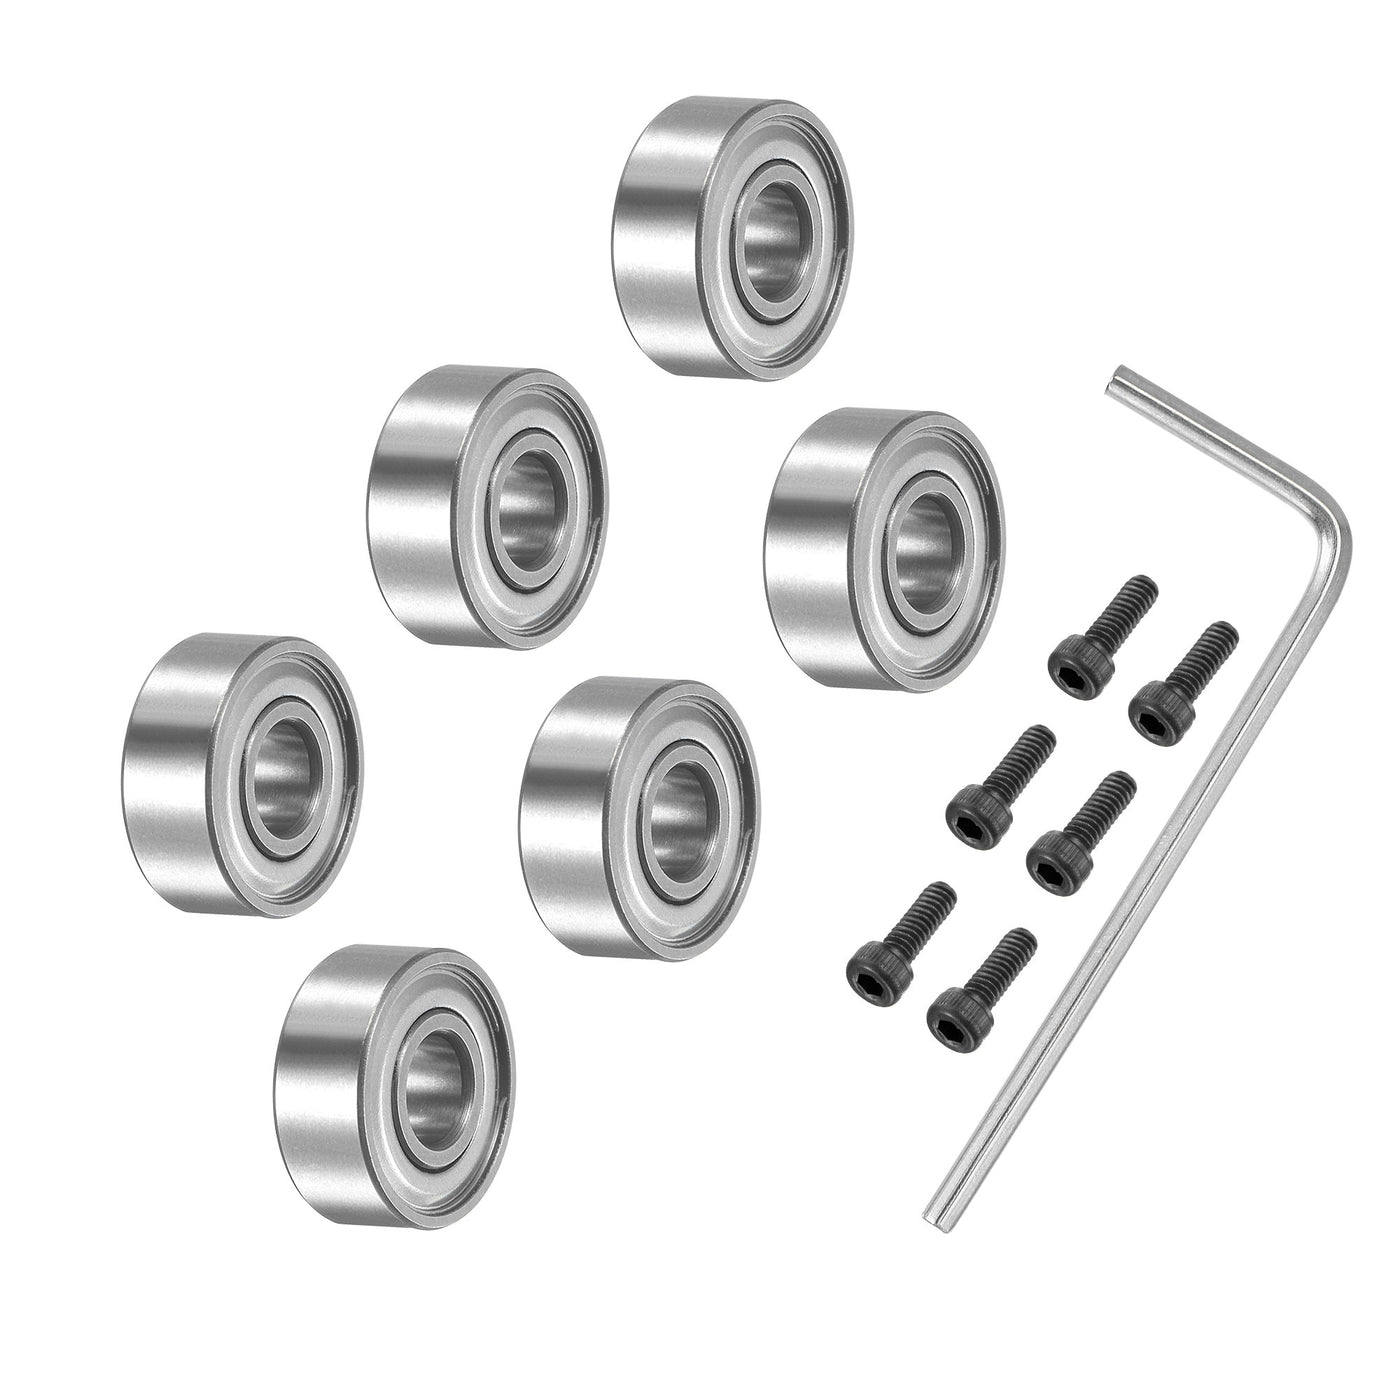 Uxcell Uxcell 12Pcs Bearing Accessory Kit 3/16" I.D. 3/8" OD 1/8" Thick Top Mounted Bearings for Router Bit (#5-40 x 3/8" Screws)